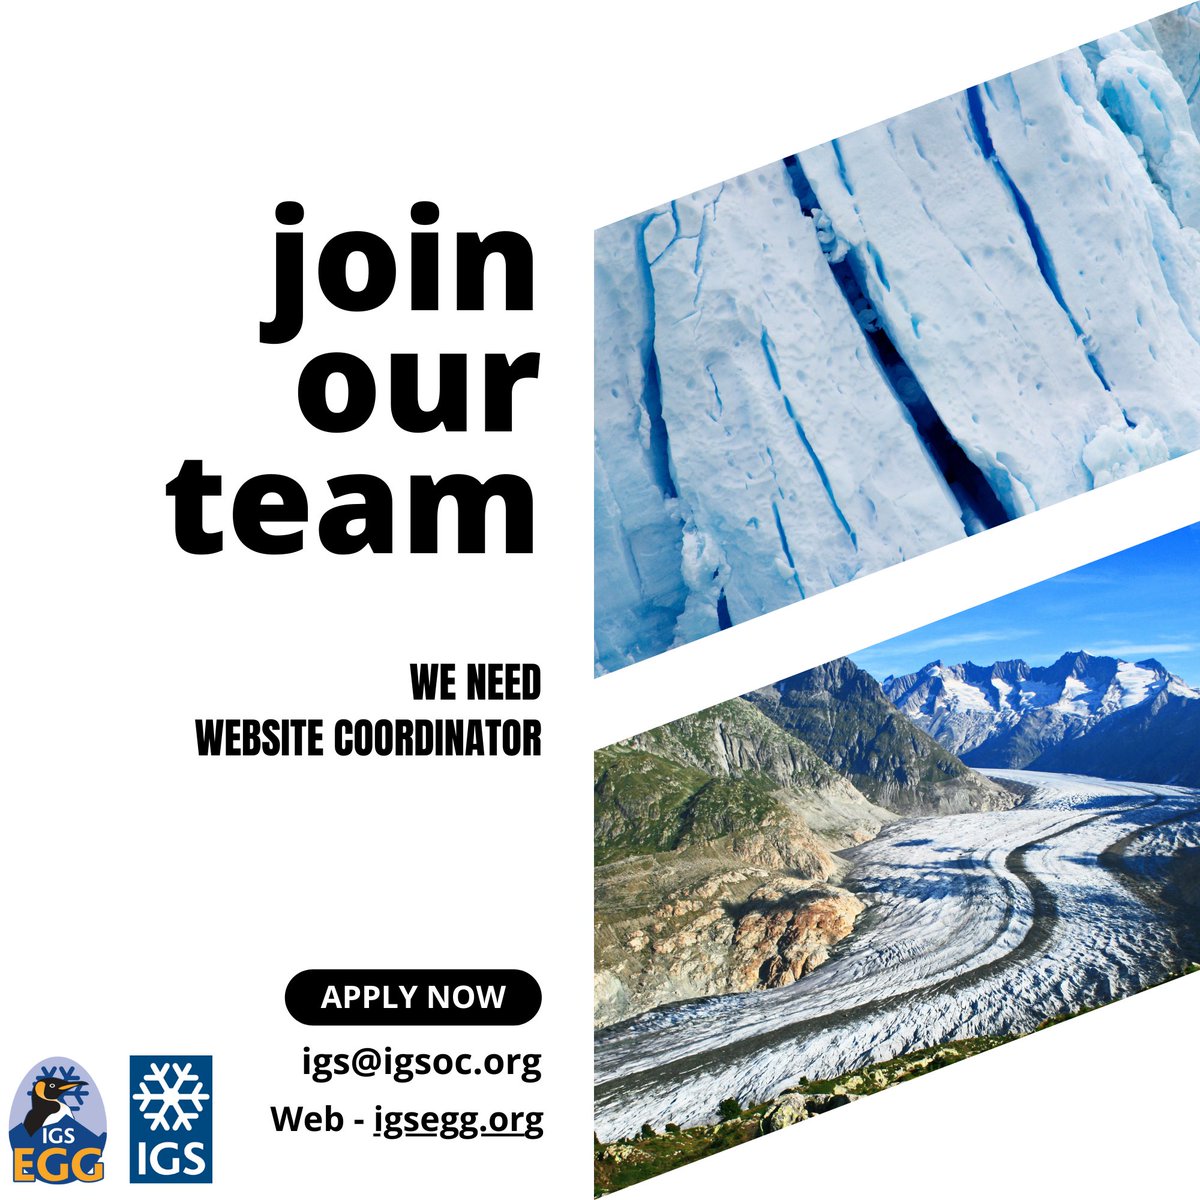 We are seeking passionate individuals who are keen in contributing to shaping the future of glaciological research and the experience of ECRs in the field.

DM us or email if you’re interested to be a part of IGS EGG

@igsoc